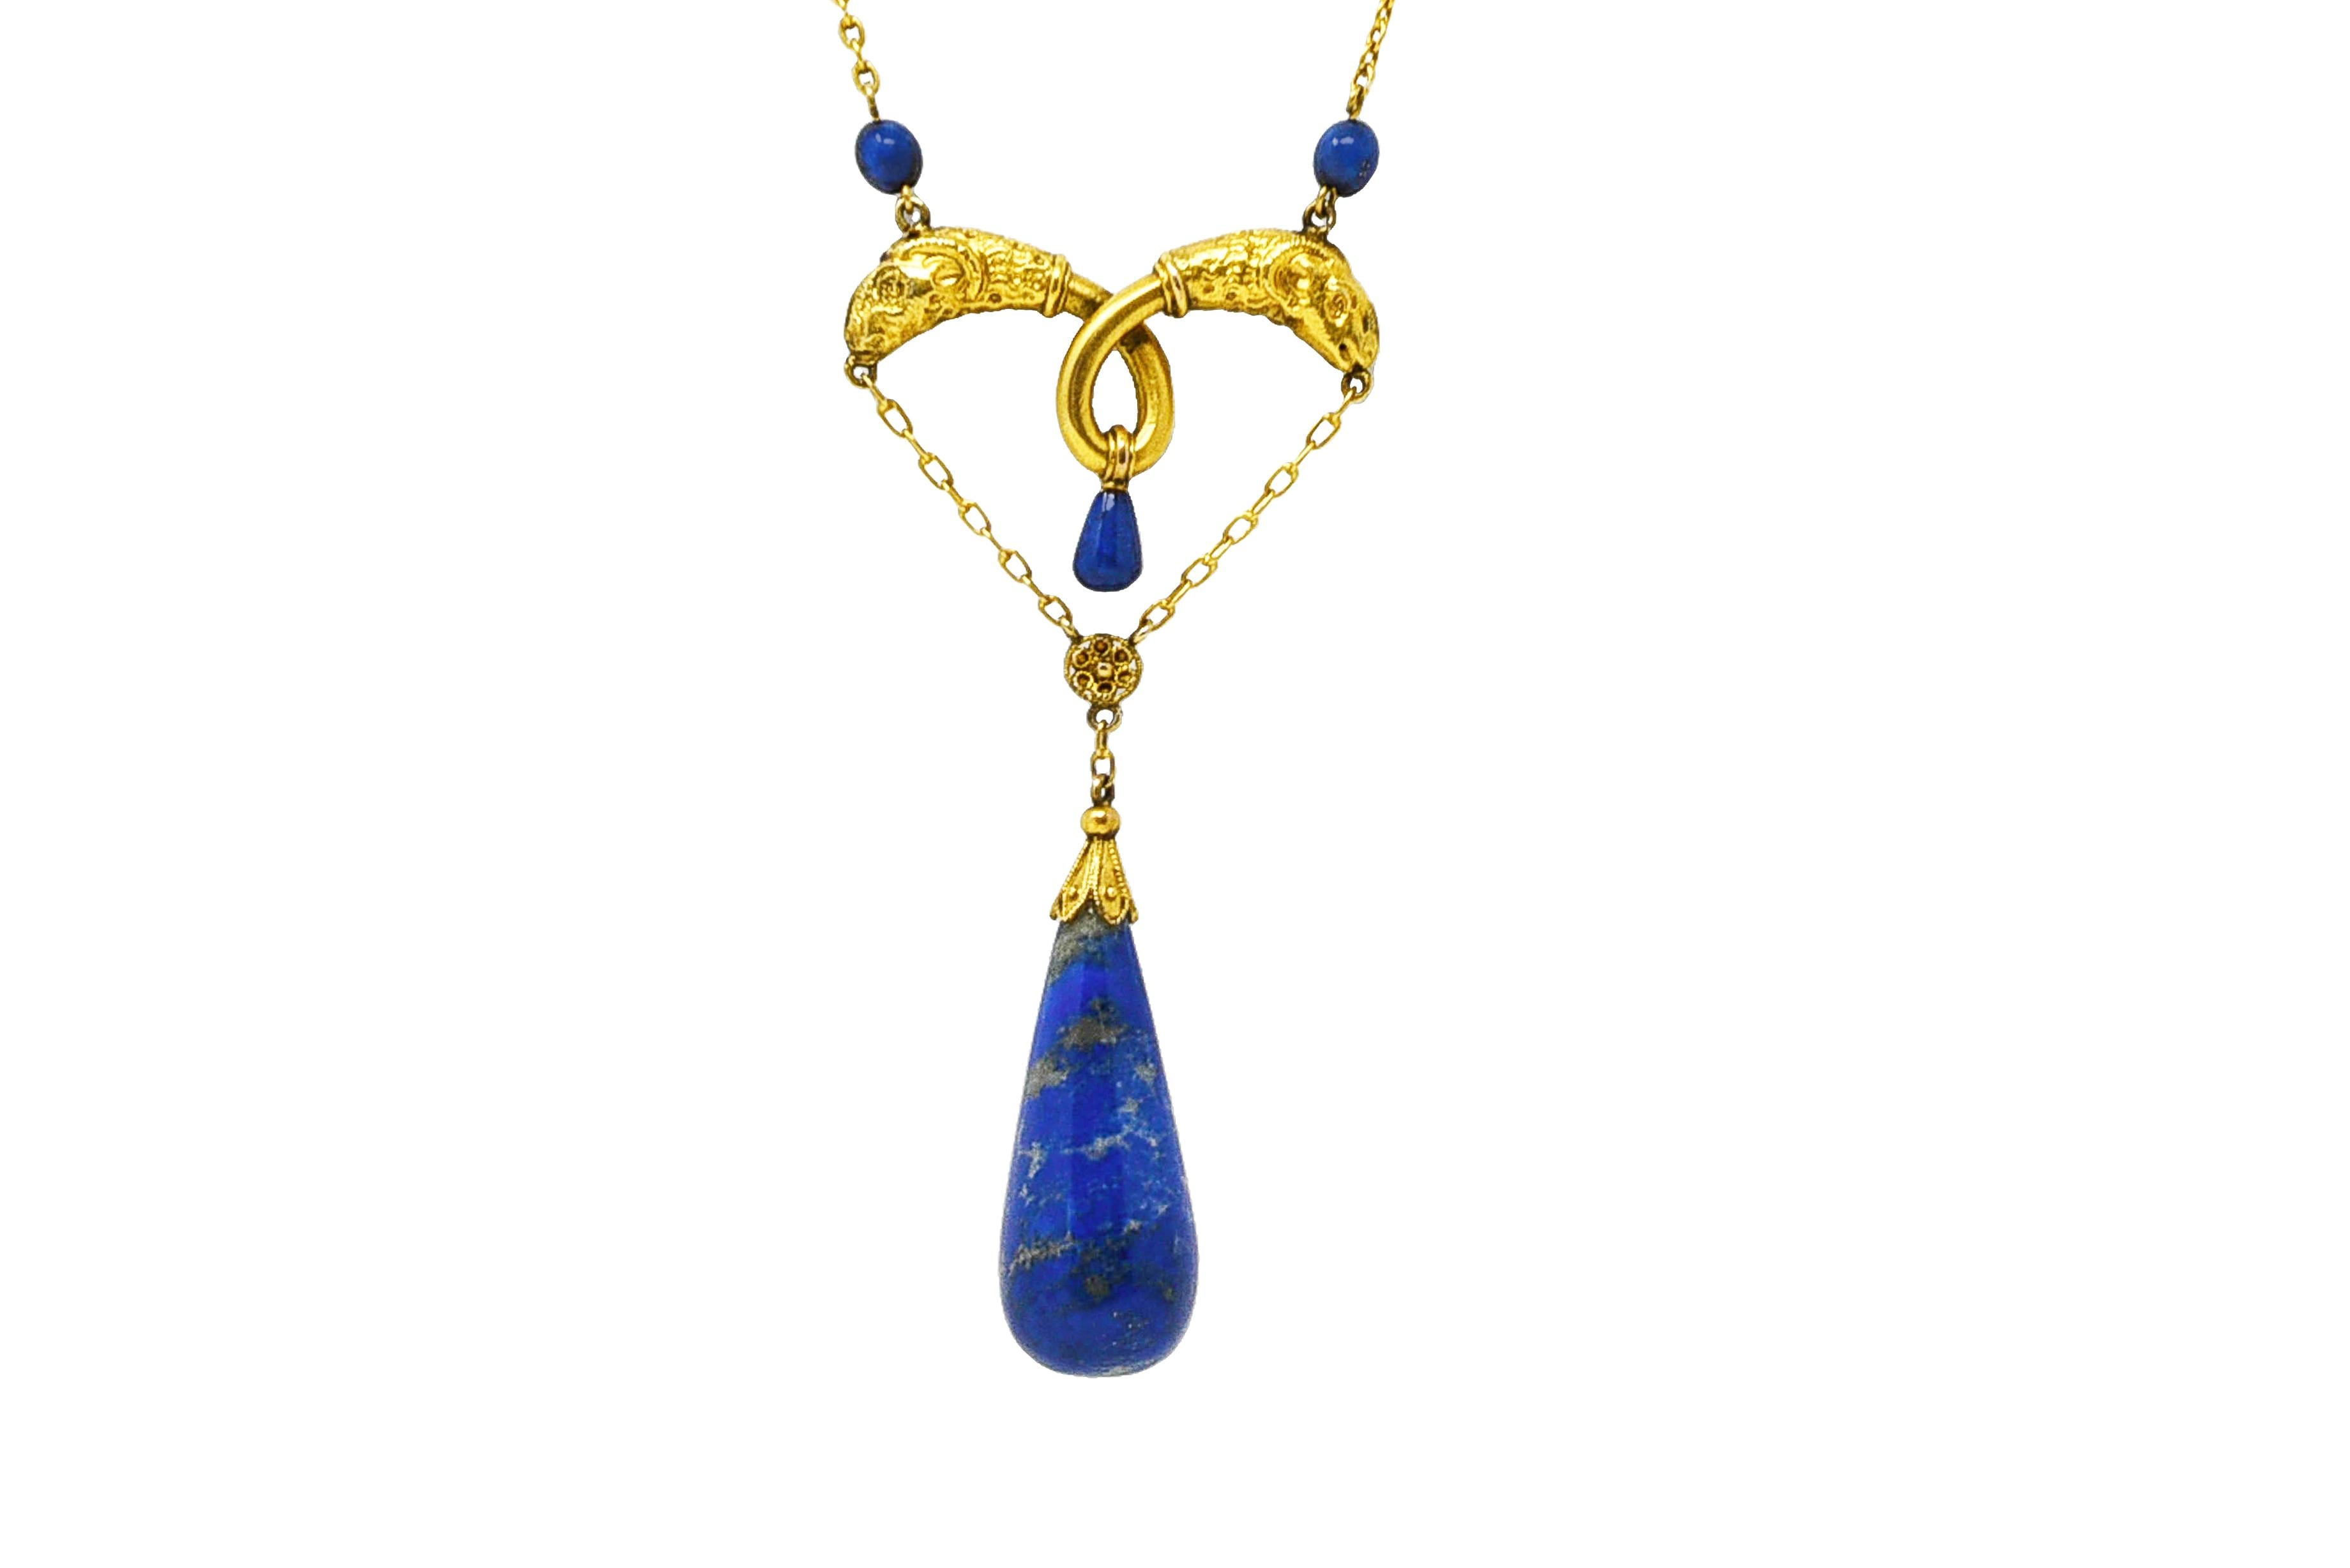 Victorian Etruscan Revival Lapis Lazuli 14 Karat Yellow Gold Swagged Necklace In Excellent Condition For Sale In Philadelphia, PA